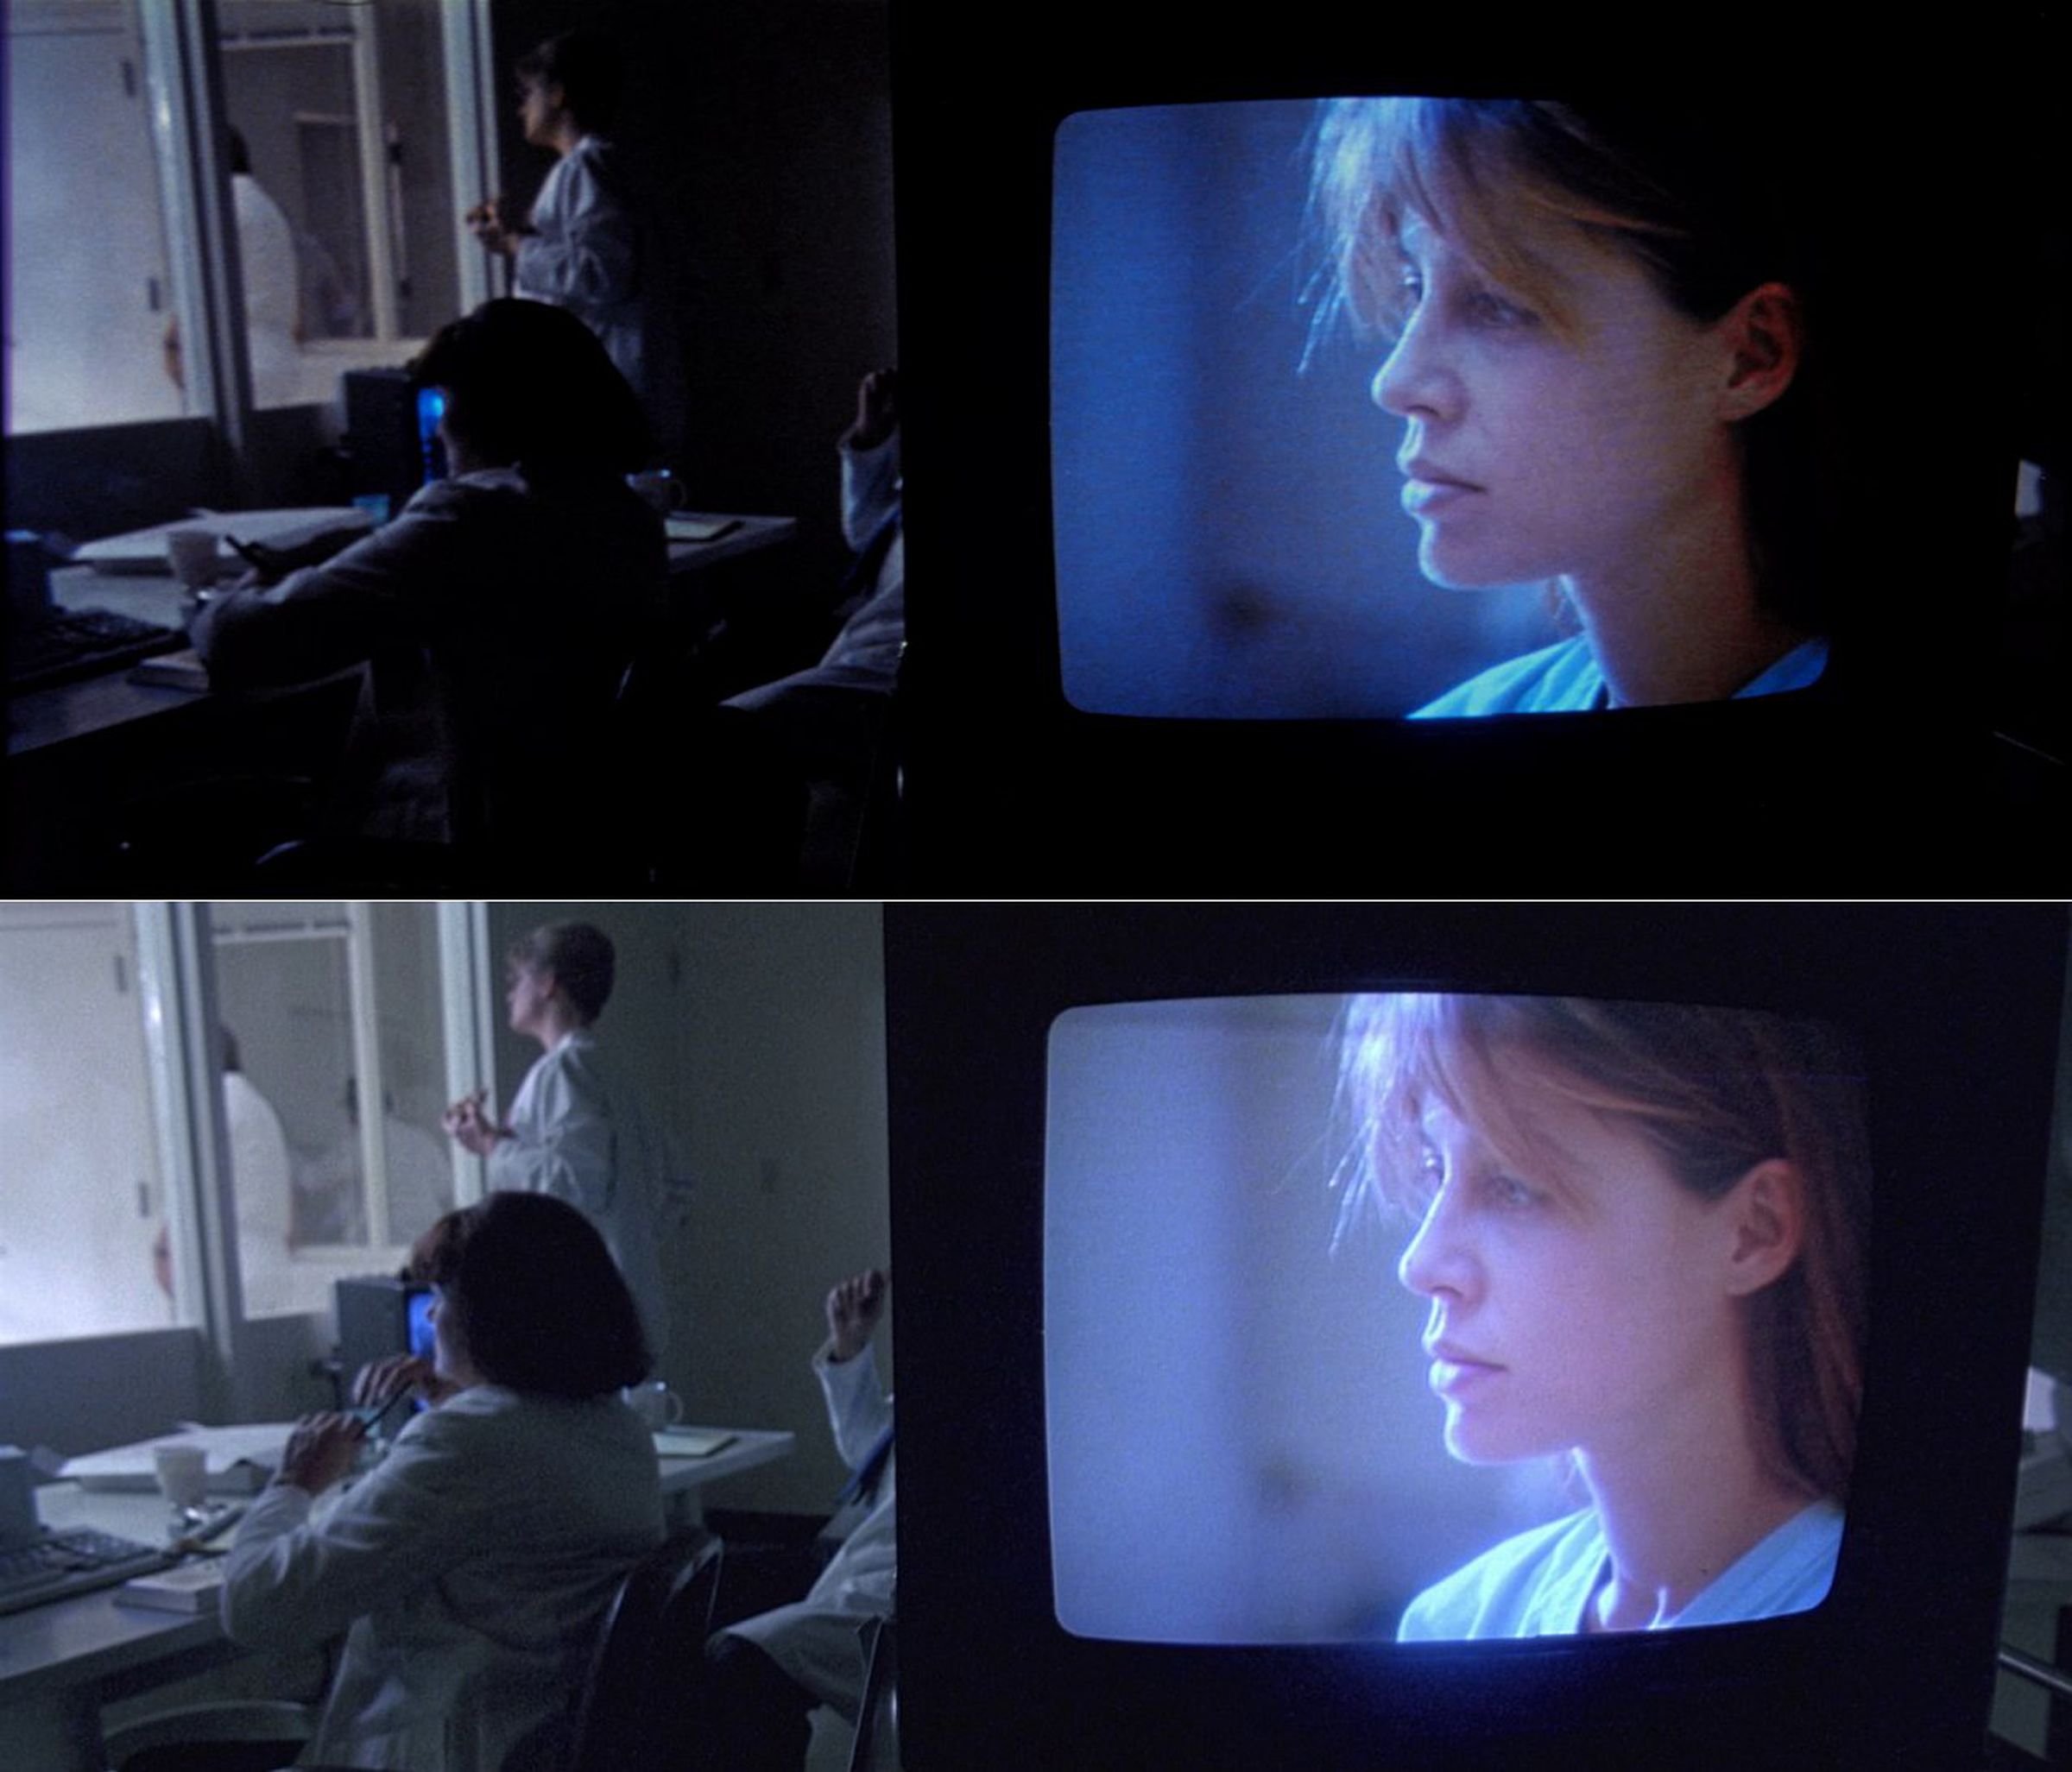 A set of two shots, one showing hospital staff looking through a window, and another showing Linda Hamilton on a small TV. In the fan restoration (top), There’s much greater contrast on the staff, and the TV screen is a little bluer and darker, while on the bottom, things are brighter and the back wall behind the staff is visible, instead of being in black shadow.